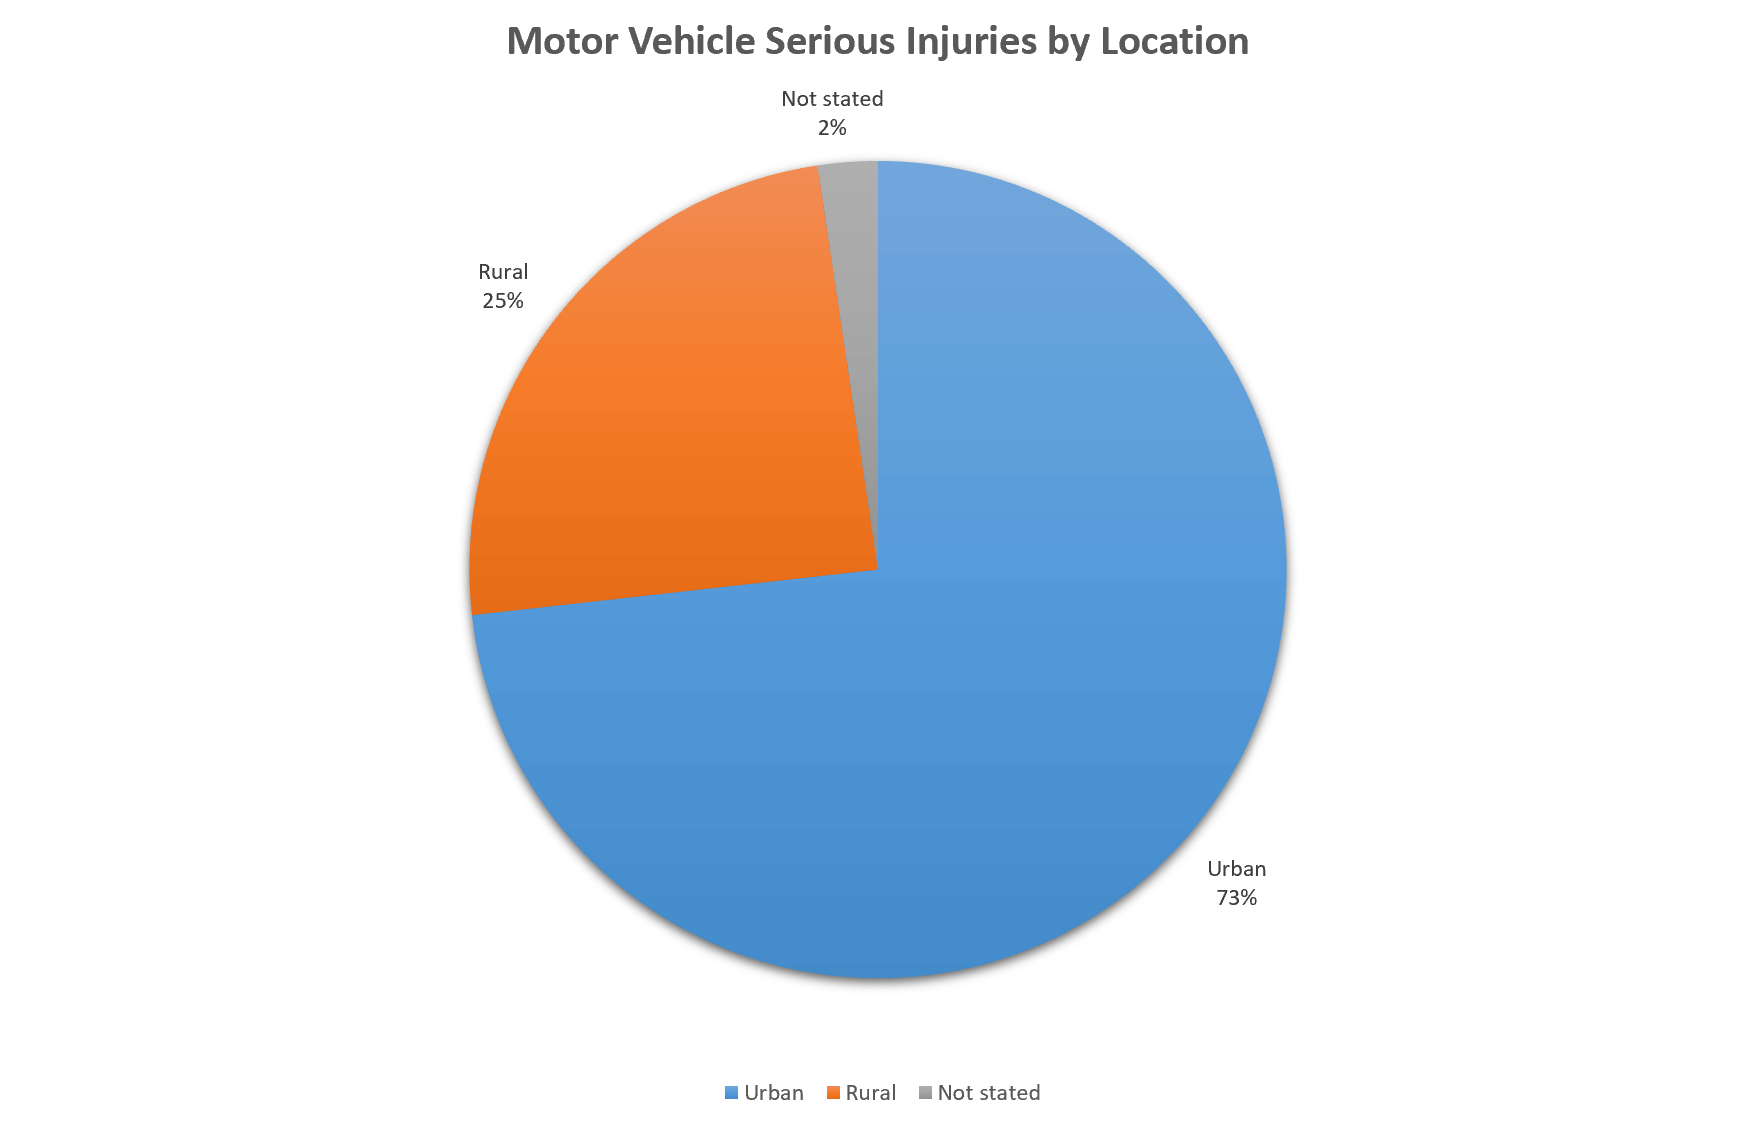 Motor Vehicle Serious Injuries by Location